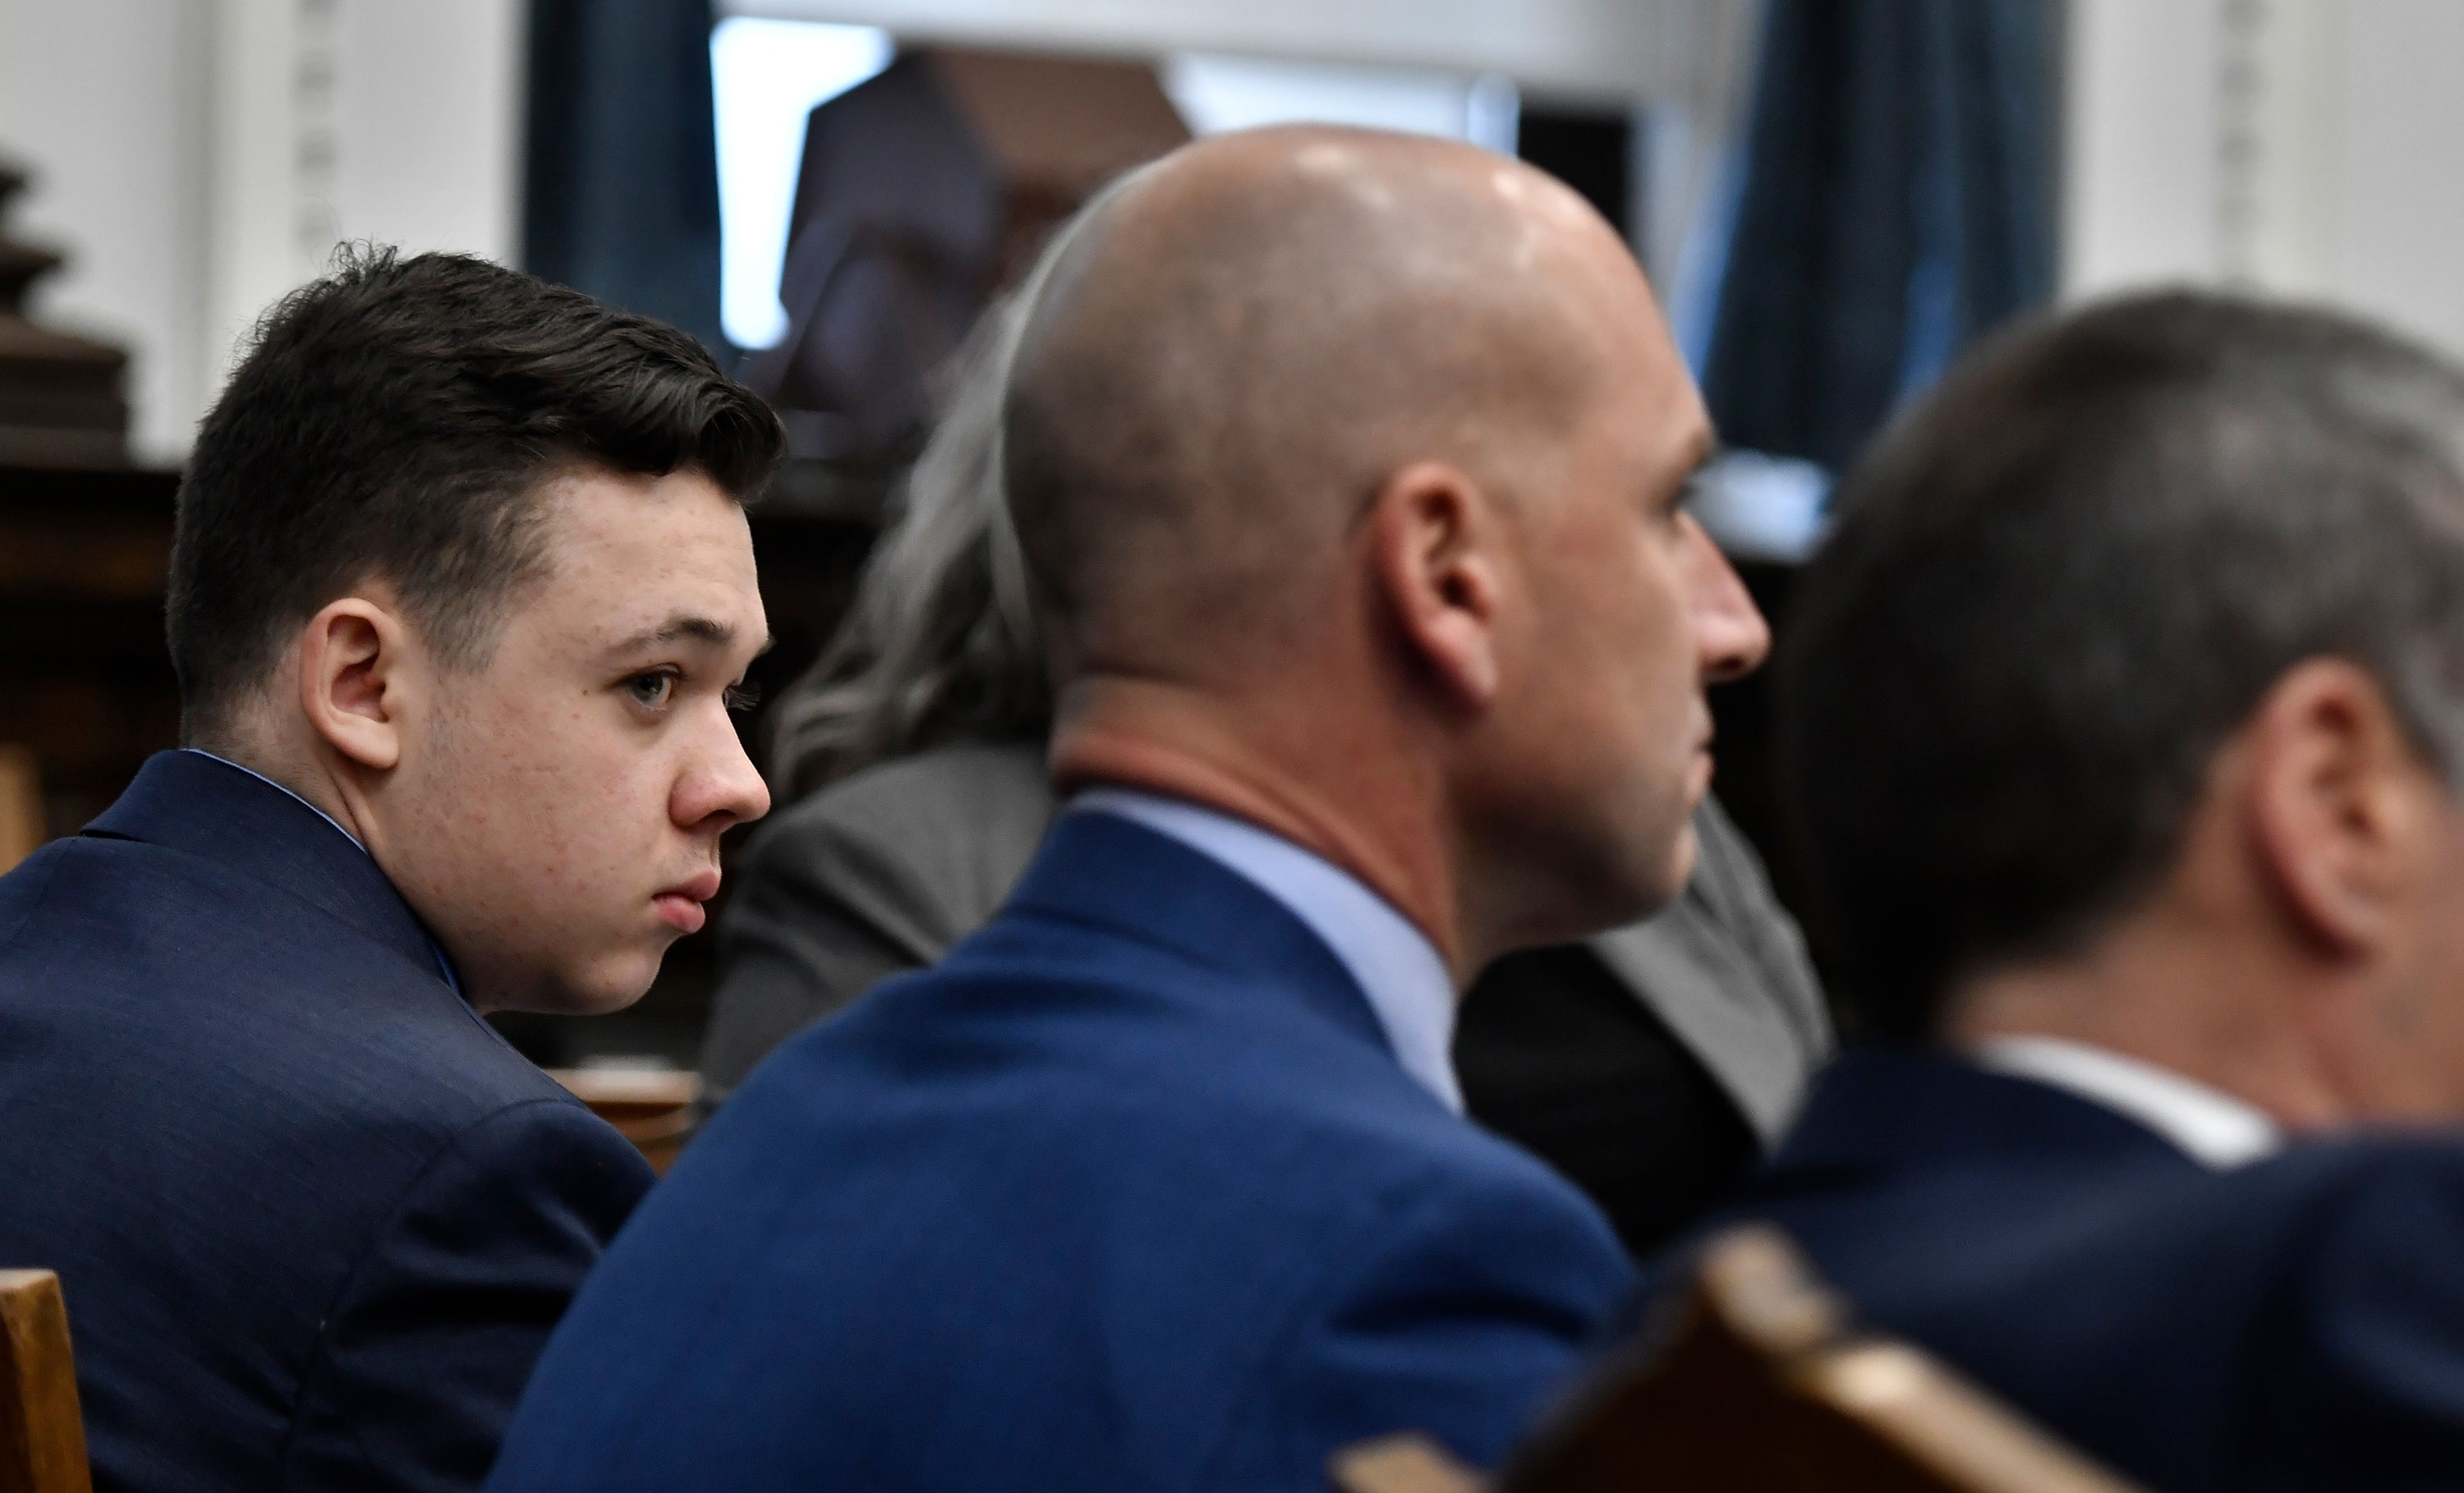 Kyle Rittenhouse listens as the attorneys and the judge talk about jury instructions in Kenosha, Wisconsin, on Monday.